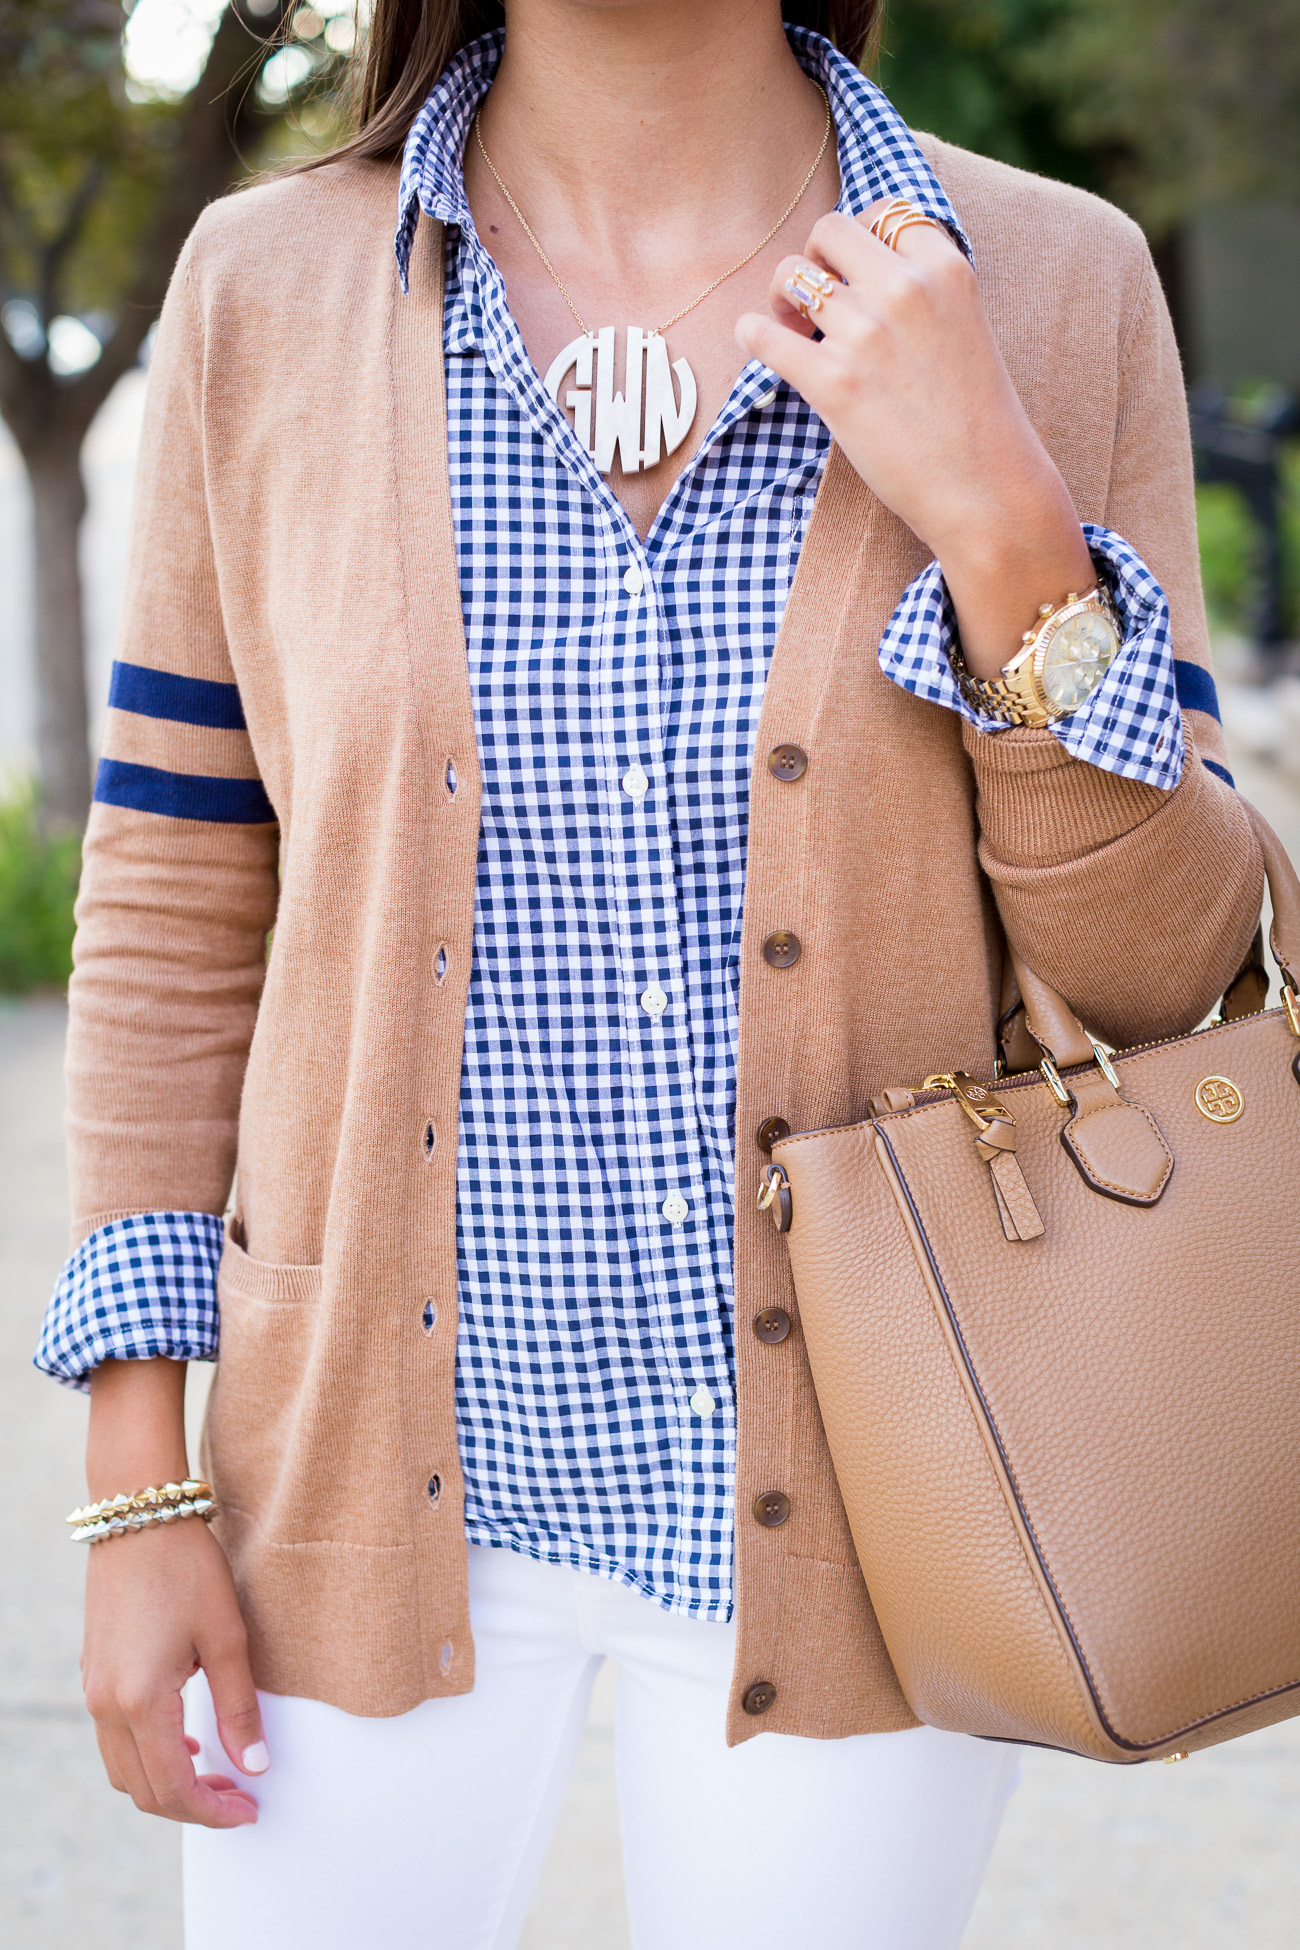 varsity sweater, gingham shirt, fall outfit ideas, monogram necklace // a southern drawl